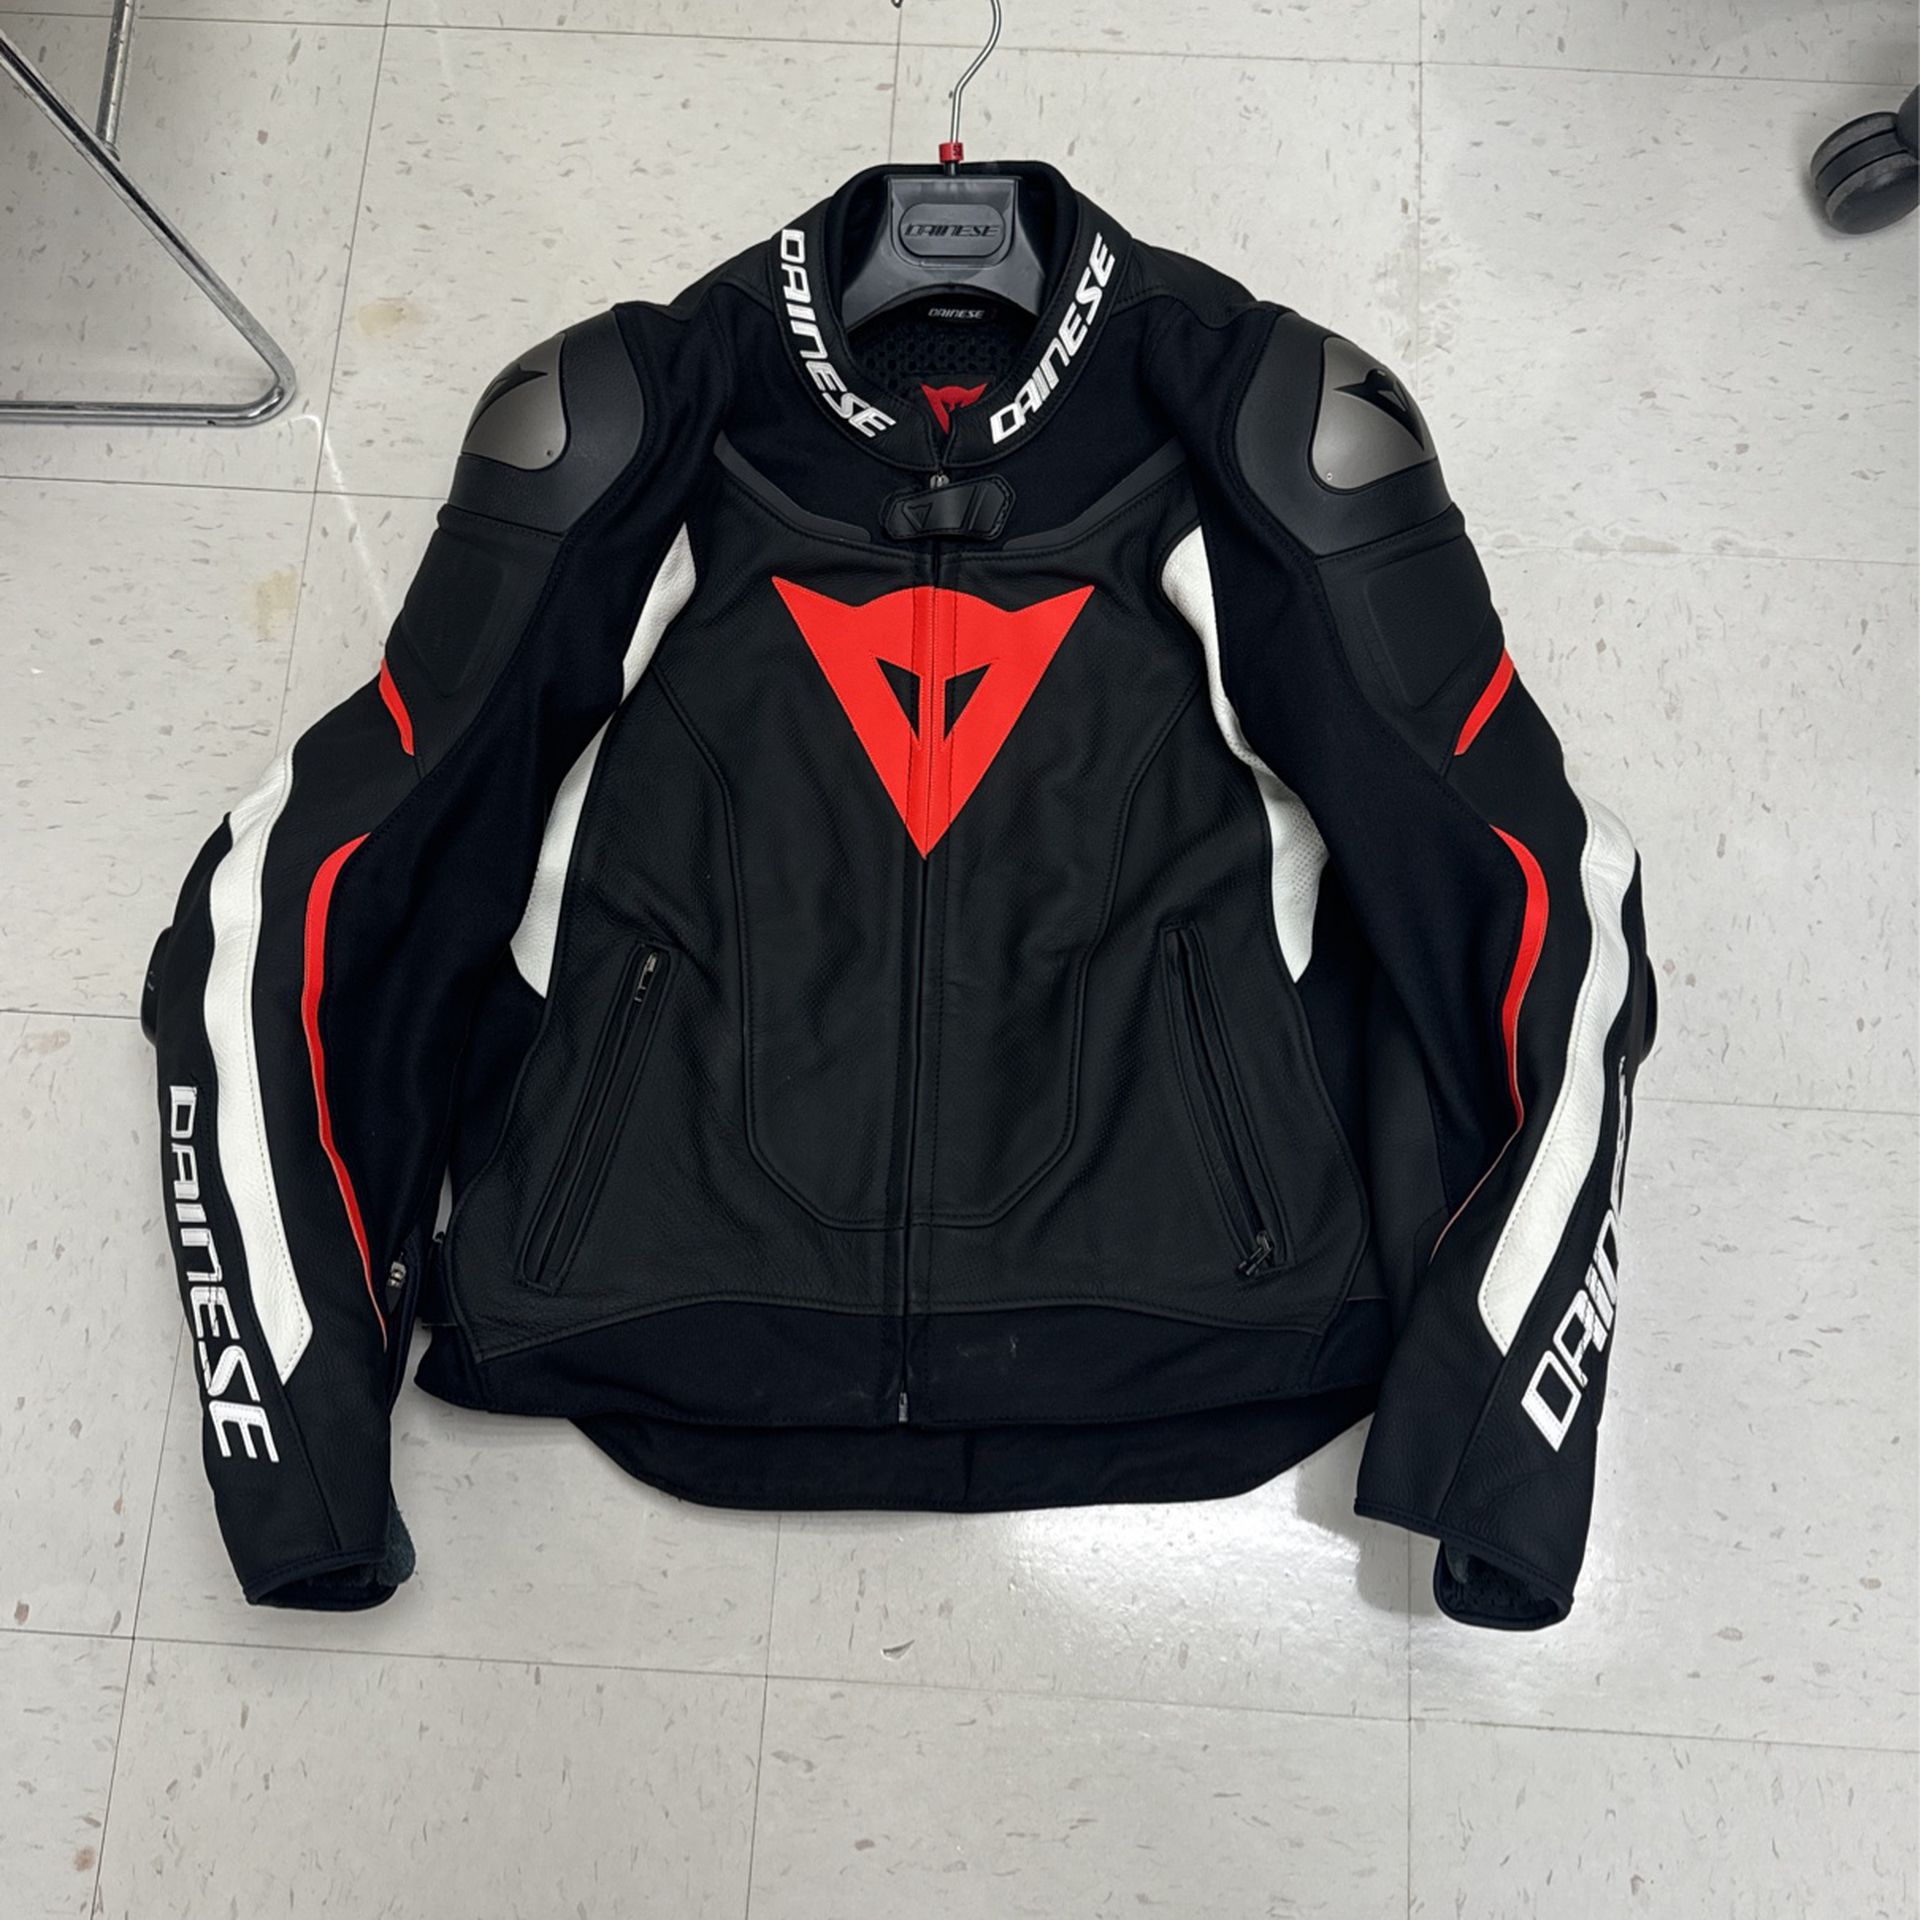 Dainese Super Speed 3 Perforated Leather Jacket Size 52